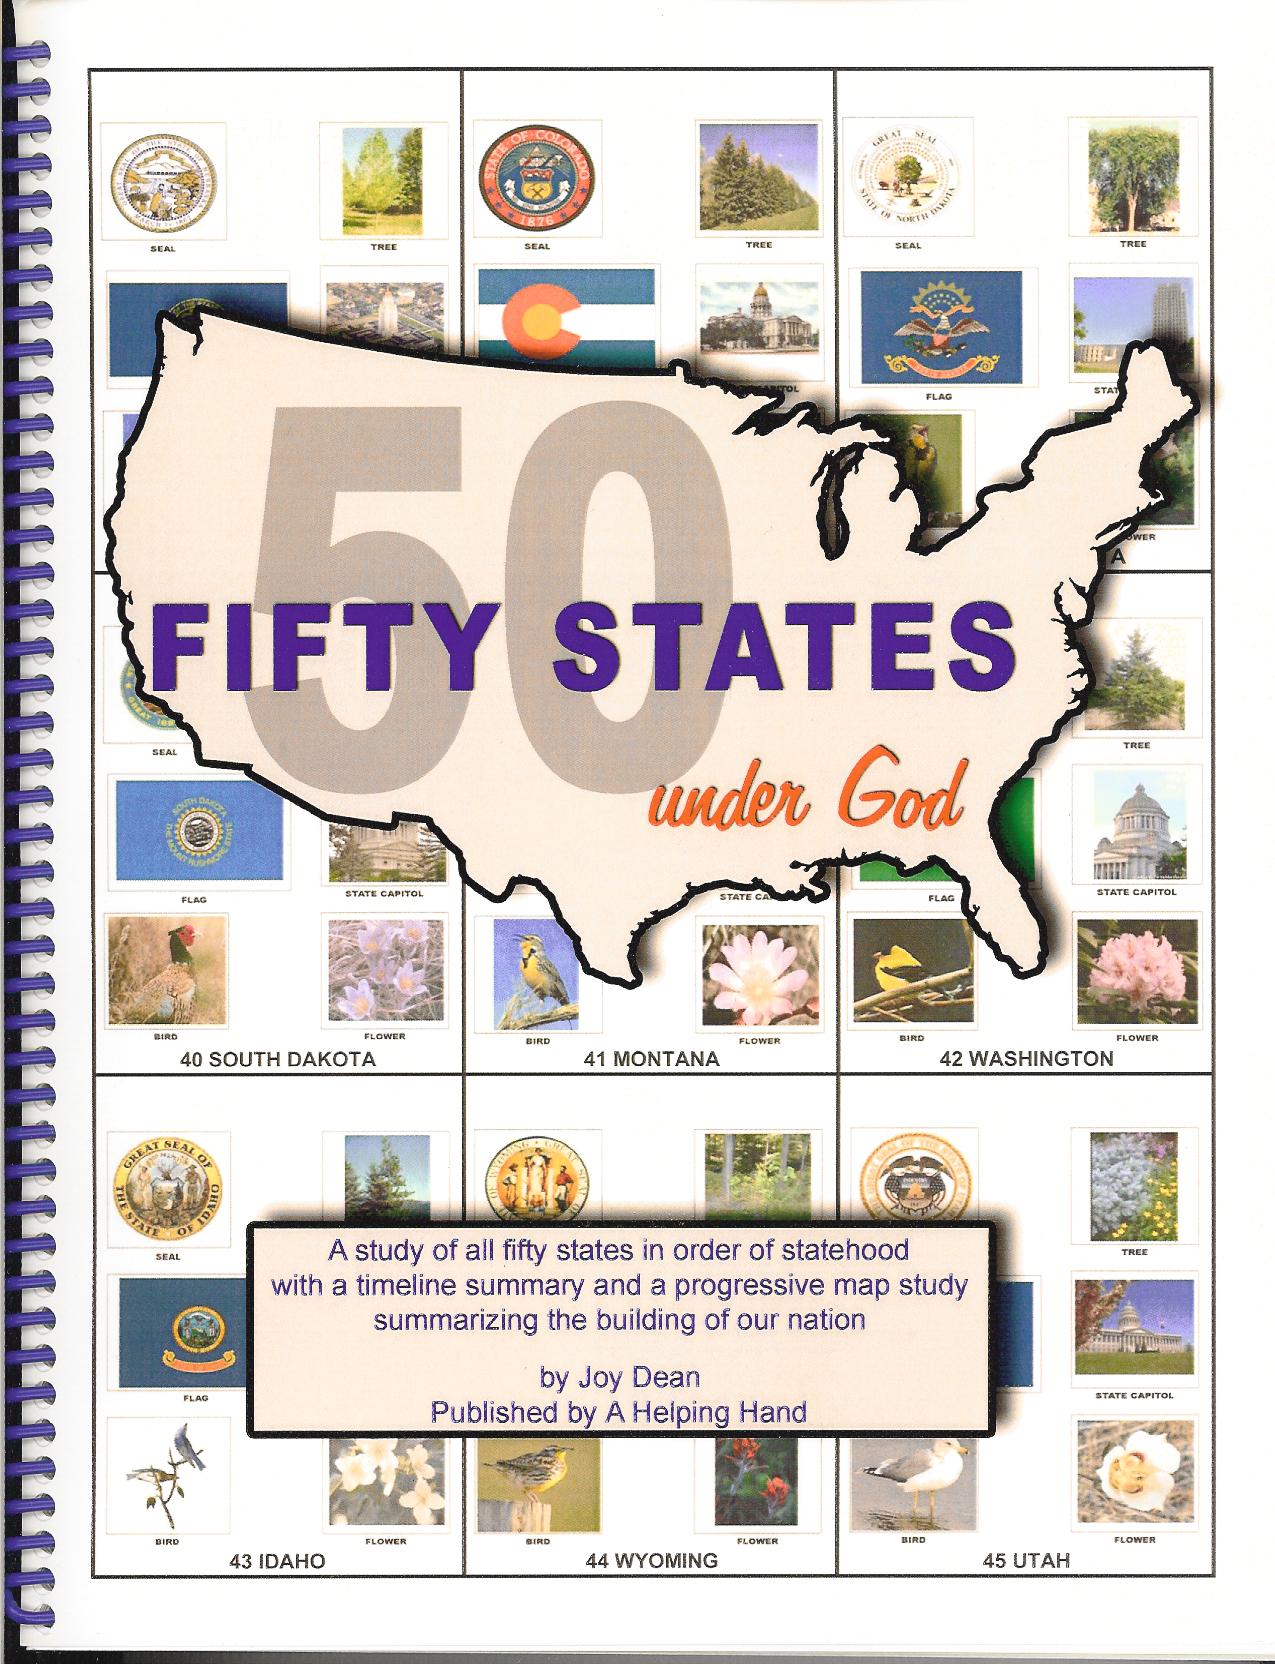 Teaching the 50 states has never been so fun. Here's one of our favorite 50 State homeschool curriculum. Check out the giveaway! #teach50statesfromachristian ##teach50statesfor kids #teach50states #teach50statesactivities